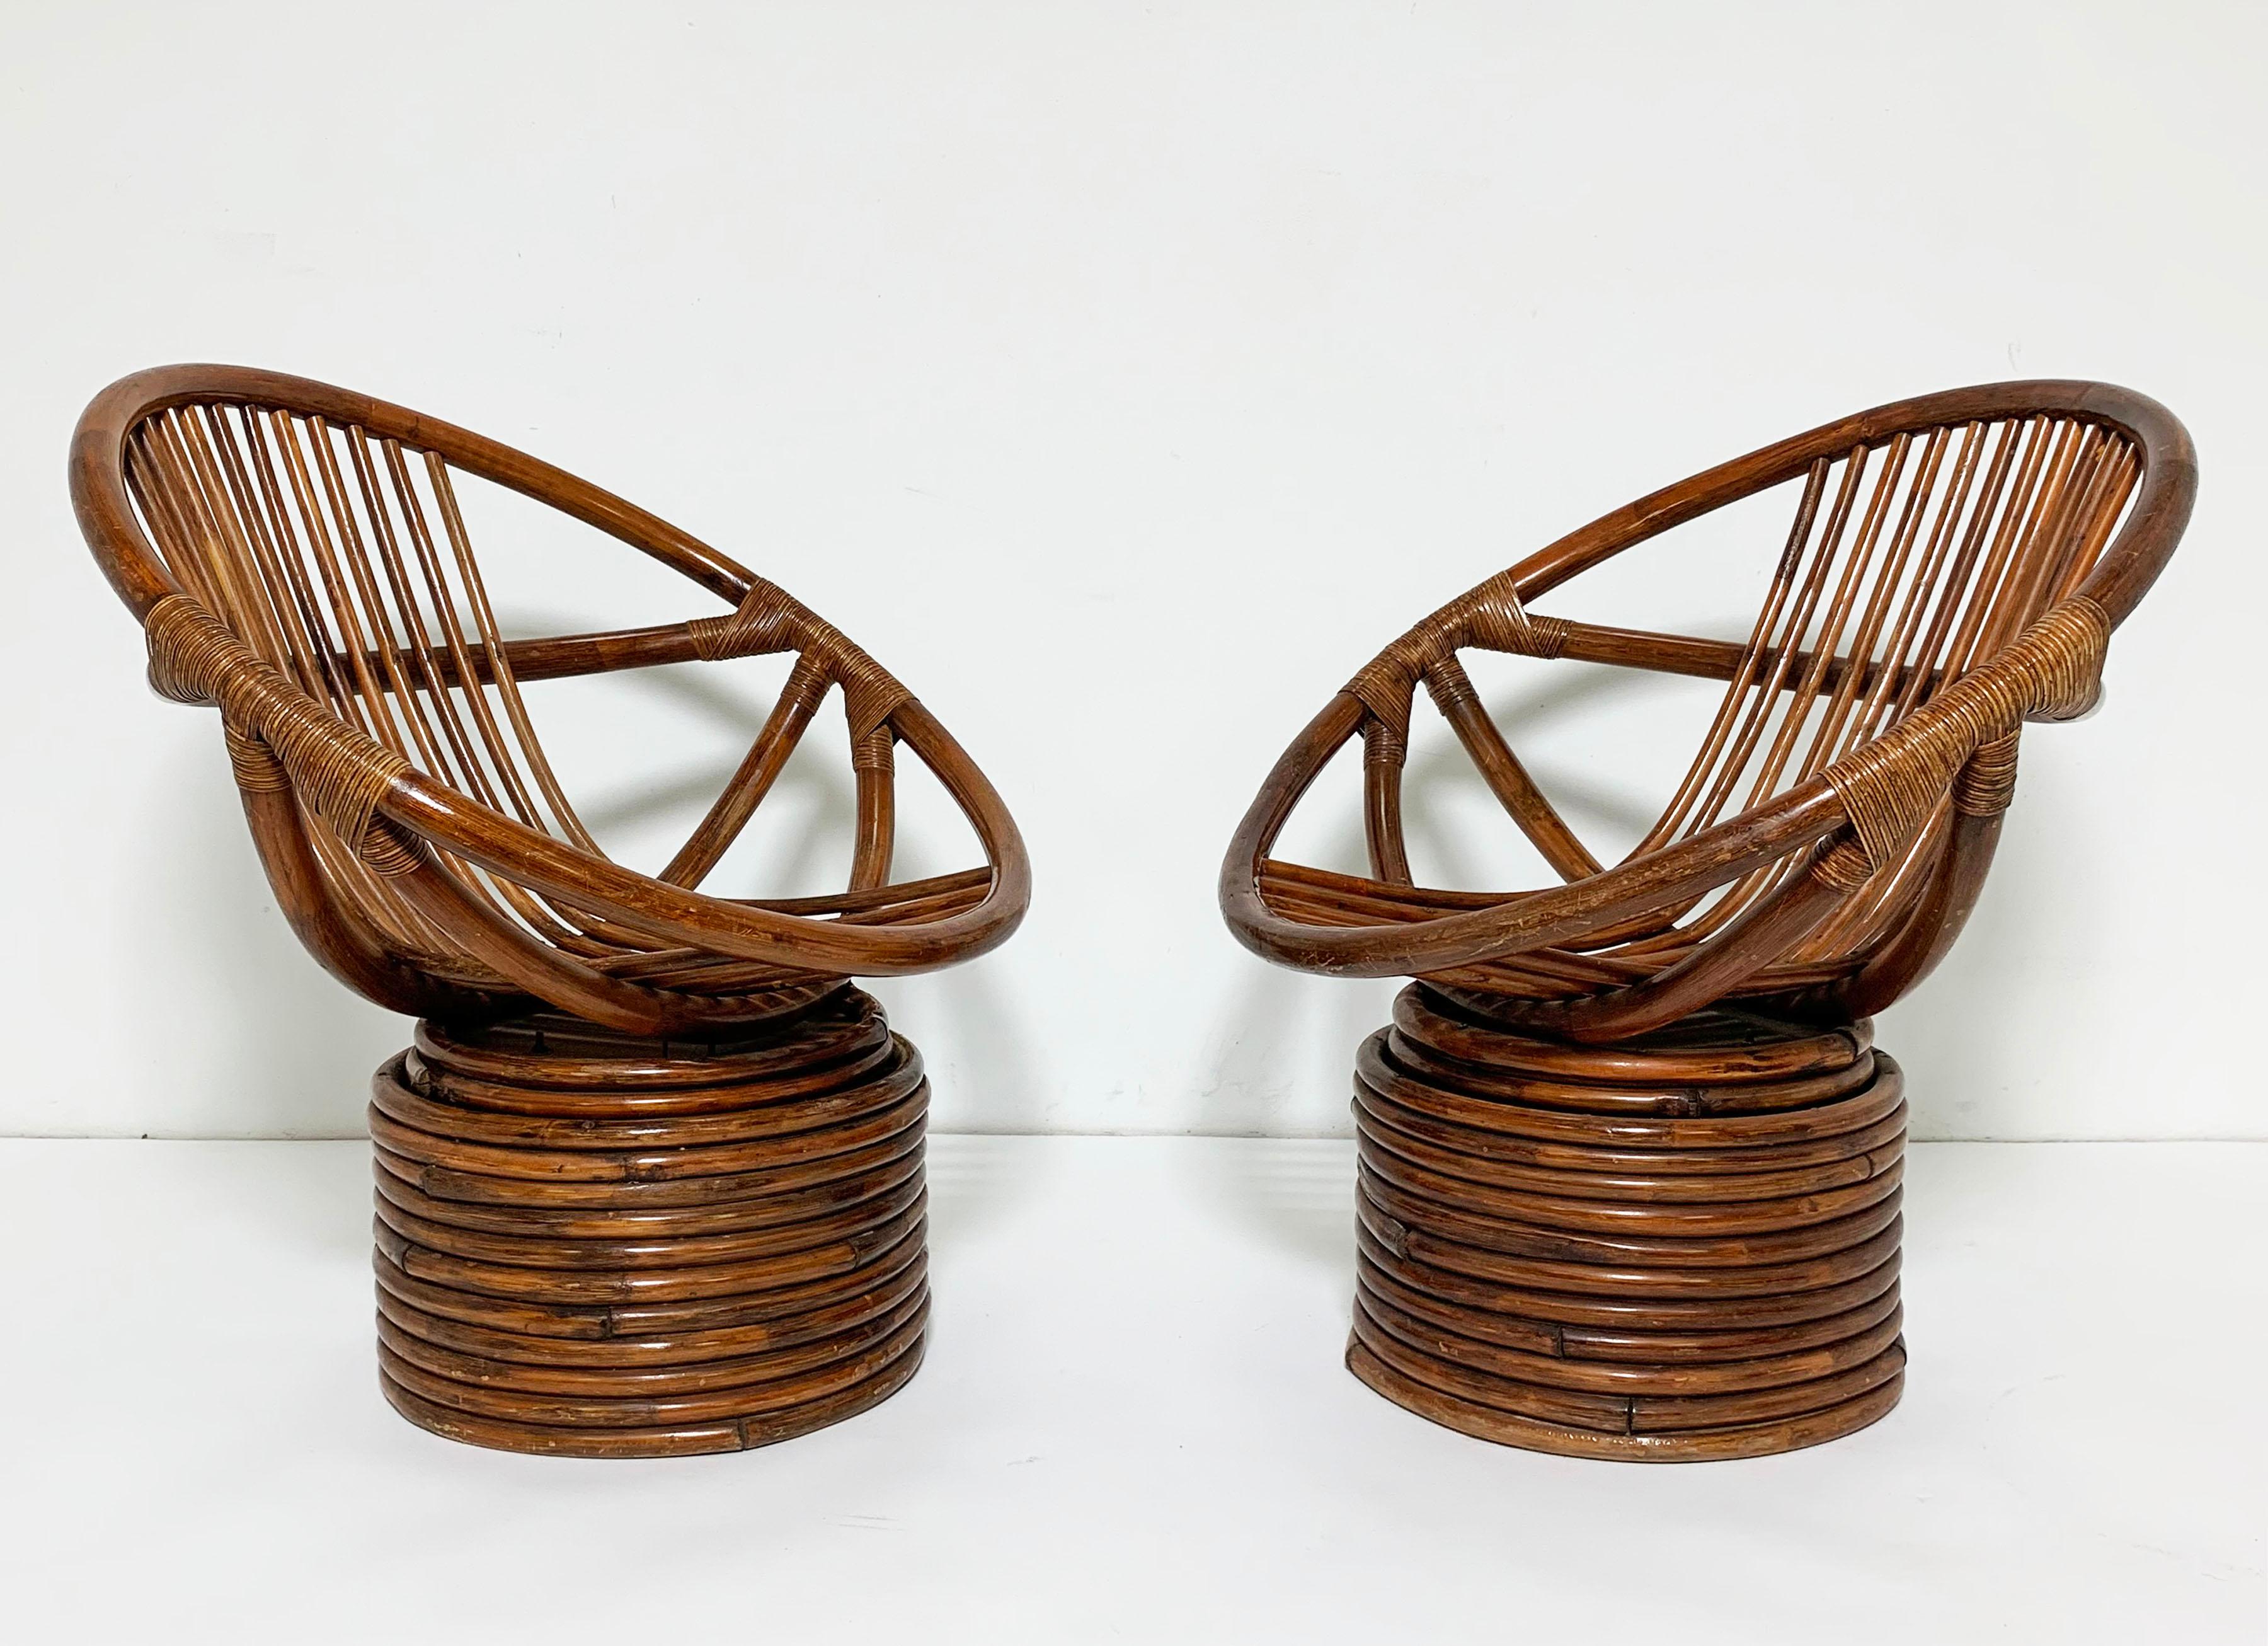 A pair of saucer-form swivel lounges in rattan, circa 1960s attributed to Sun Tropic Products of Vernon, California. These vintage chairs have always resided safely indoors. They’re extremely comfortable, even without seat cushions that might